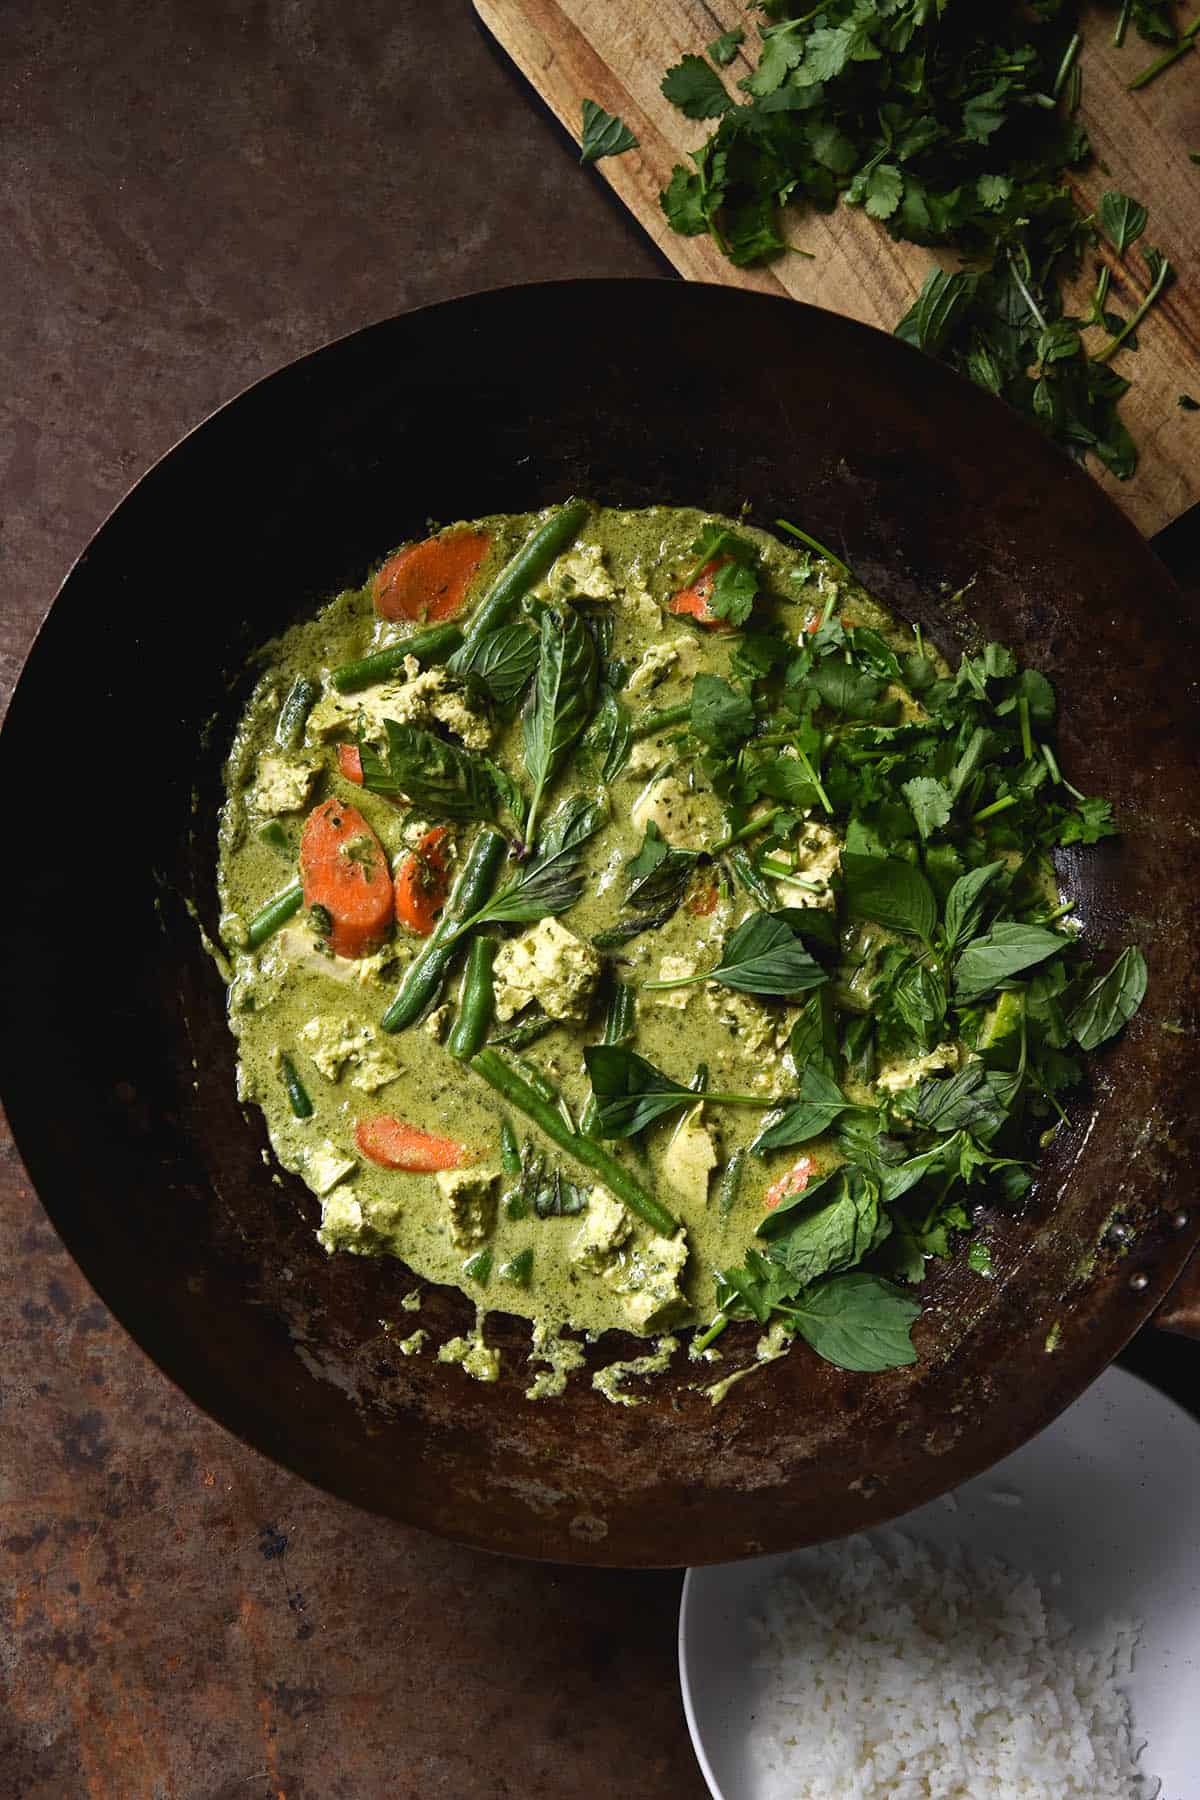 An aerial view of a wok filled with FODMAP friendly vegan Thai green curry. The curry is adorned with lots of fresh herbs, which also sit on a chopping board in the top right hand of the image. A bowl of rice sits in the bottom right hand. The scene is set on a rusty coloured backdrop